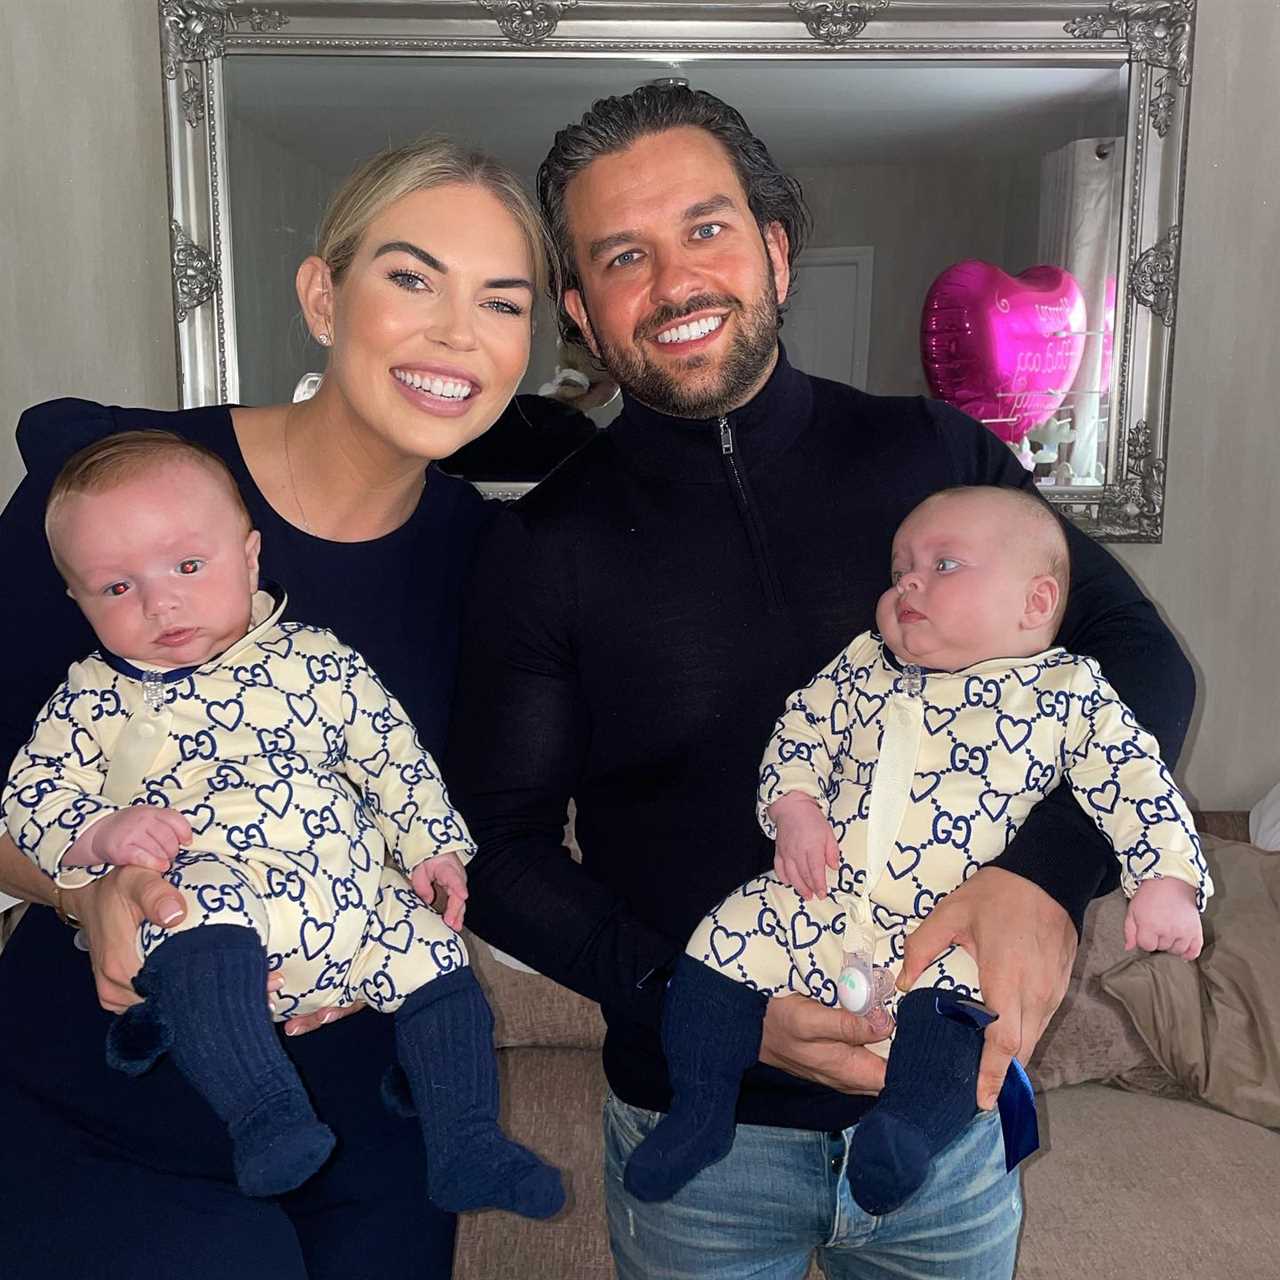 Frankie Essex’s son Logan rushed to hospital after putting exploded battery in his mouth